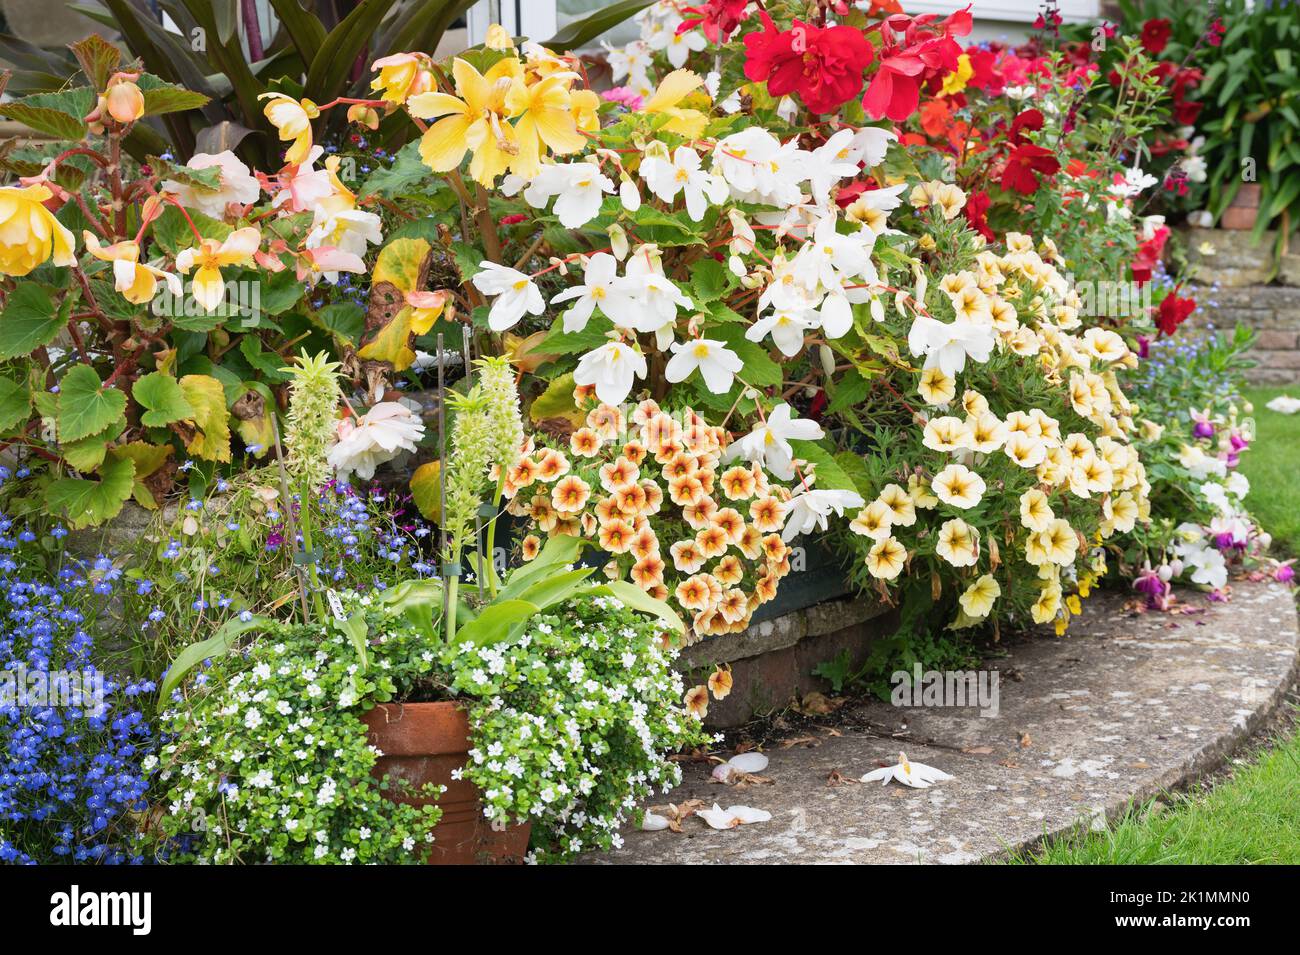 Beautiful potted flowers arrangements in the garden Stock Photo